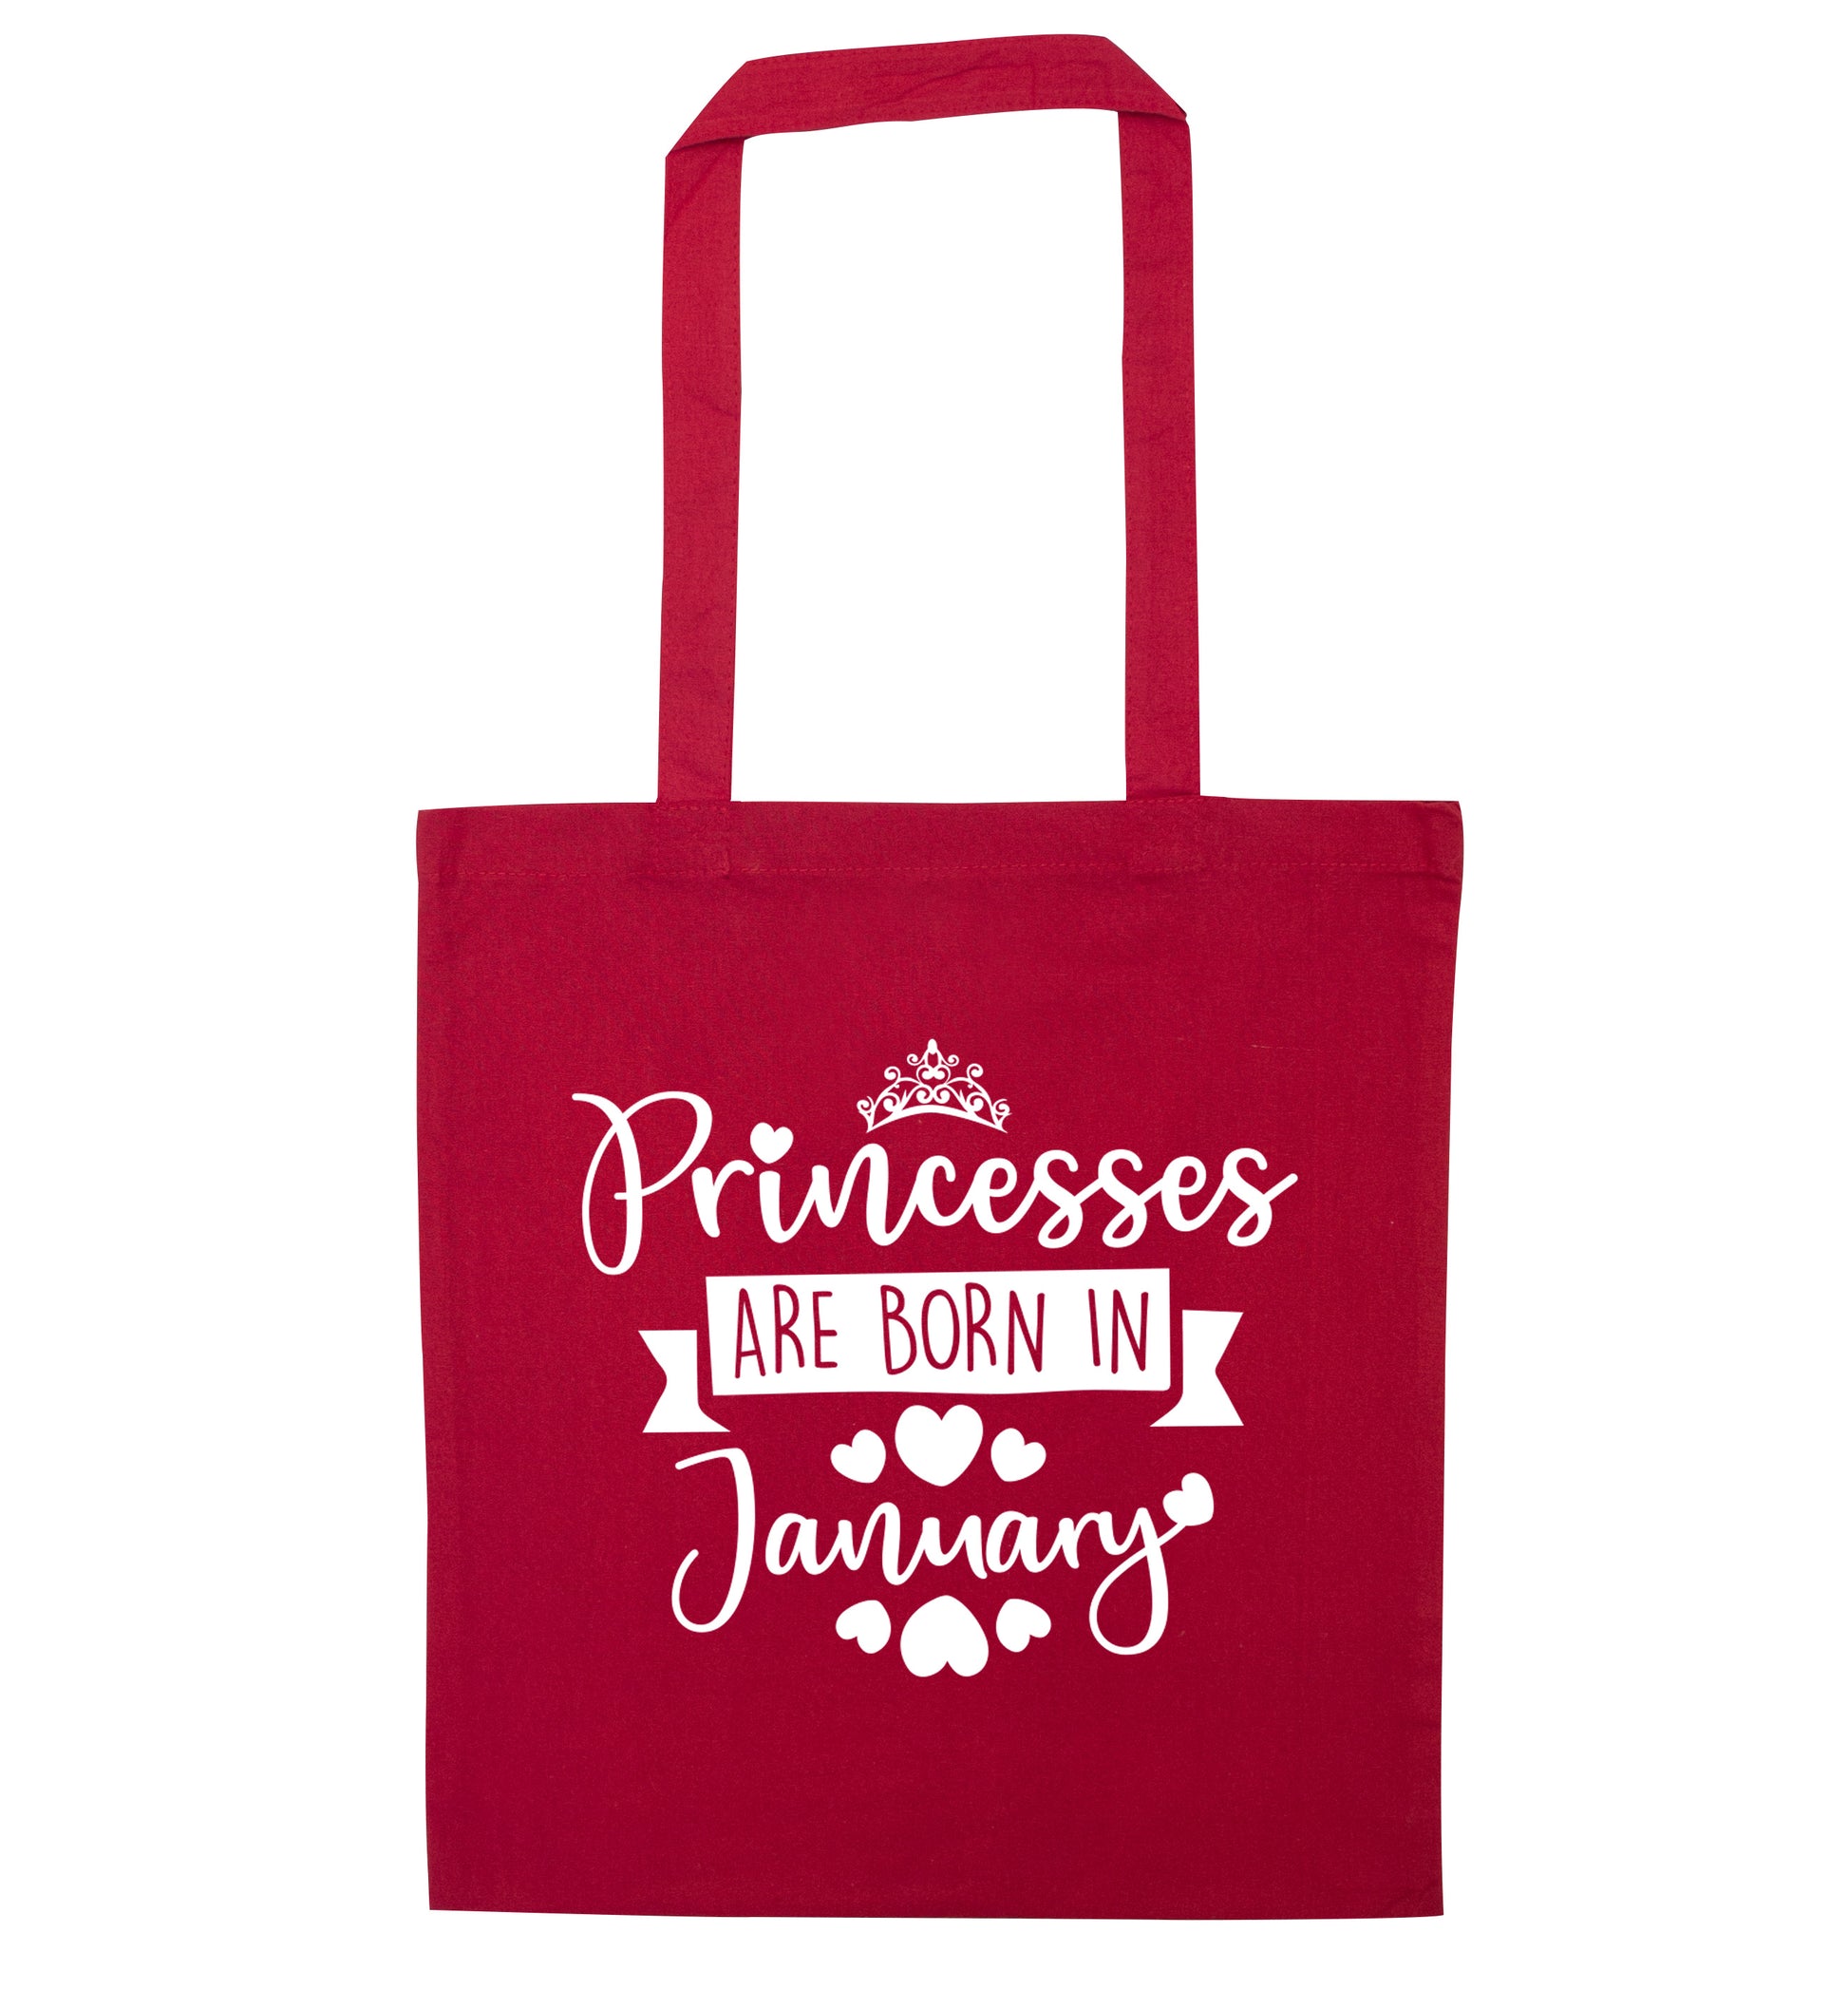 Princesses are born in January red tote bag